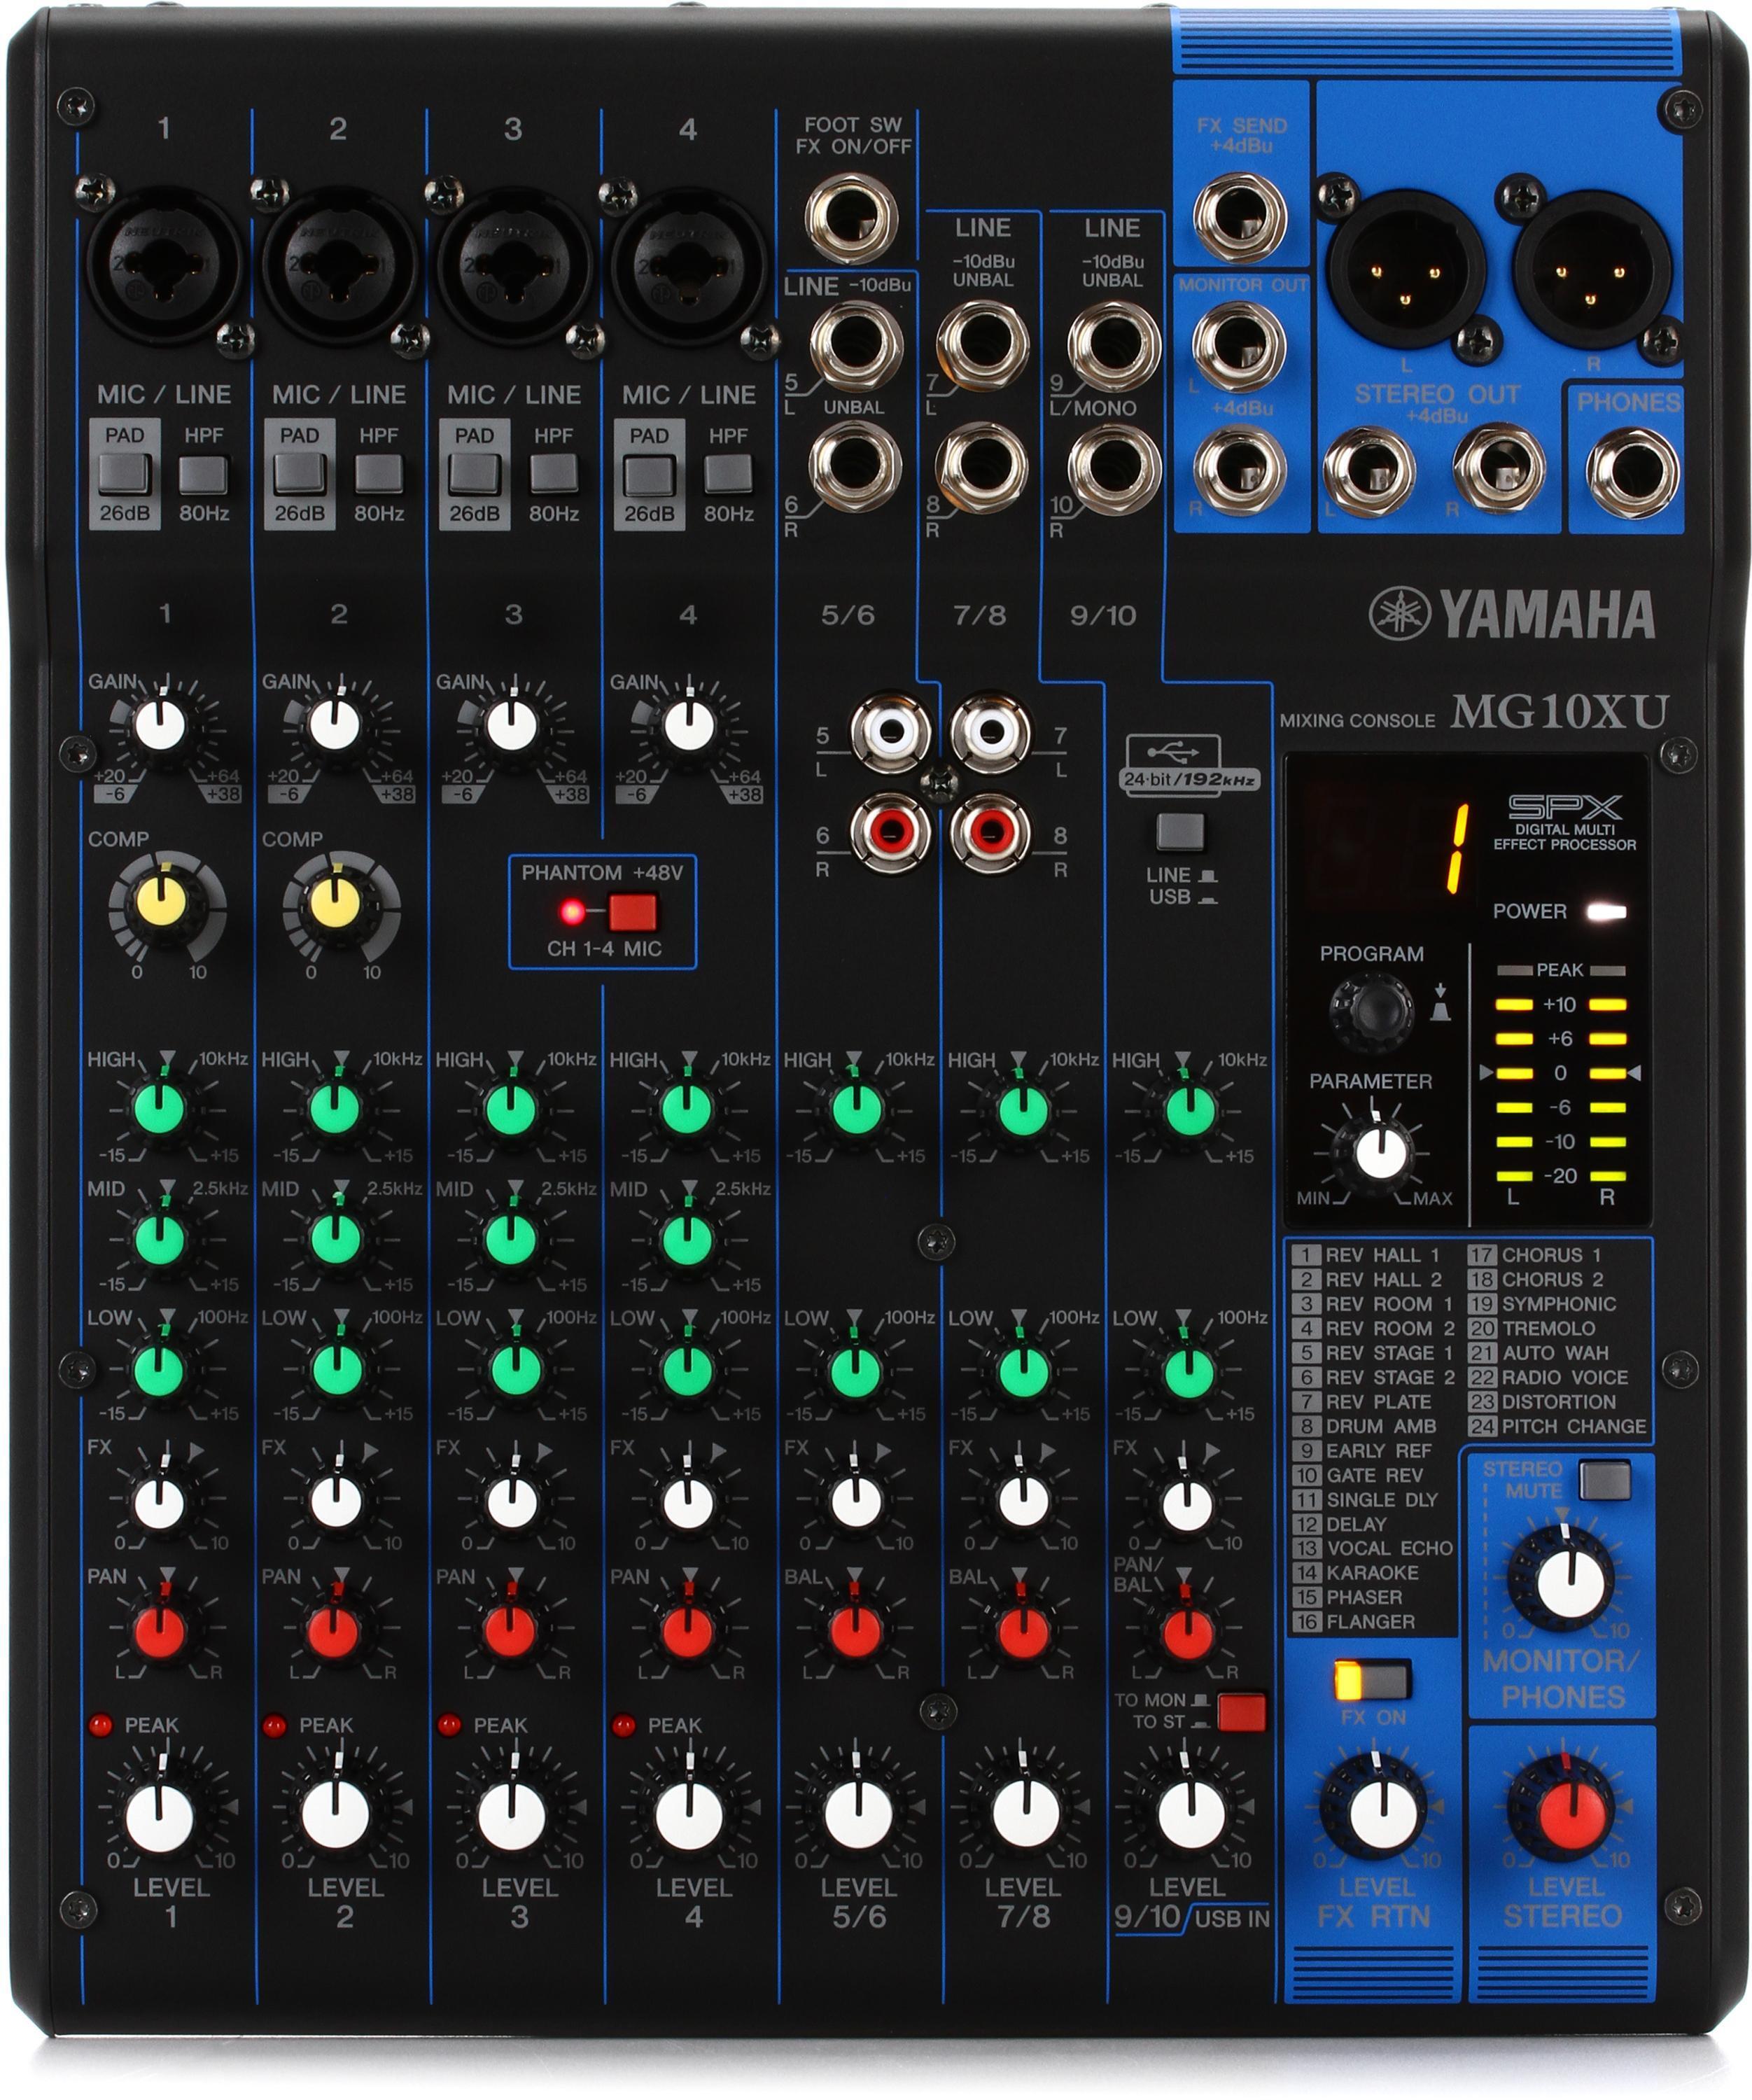 Bundled Item: Yamaha MG10XU 10-channel Mixer with USB and FX